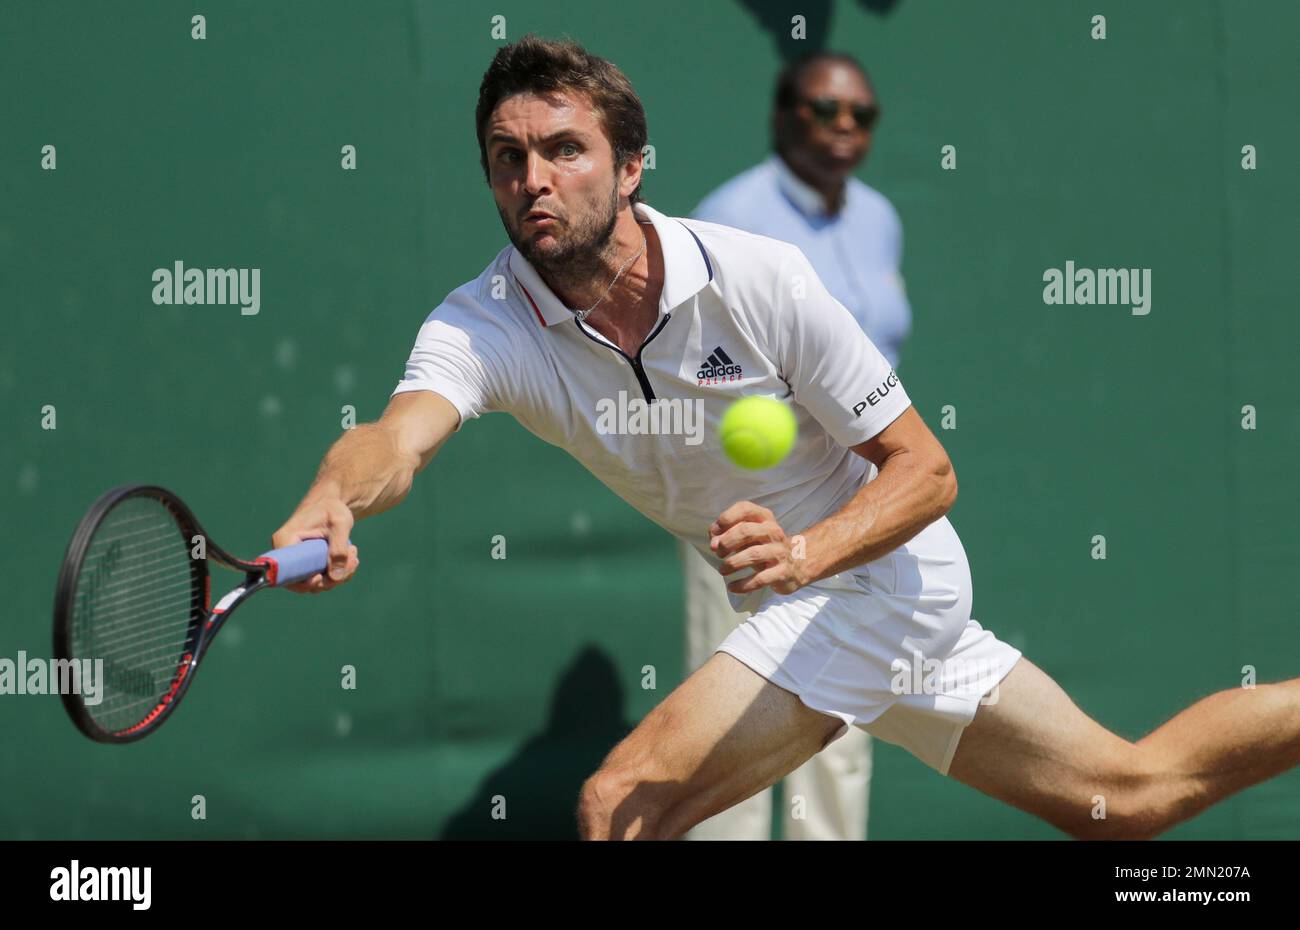 Gilles Simon of France returns a ball to Matthew Ebden of Australia during  their men's singles match on the sixth day at the Wimbledon Tennis  Championships in London, Saturday July 7, 2018. (